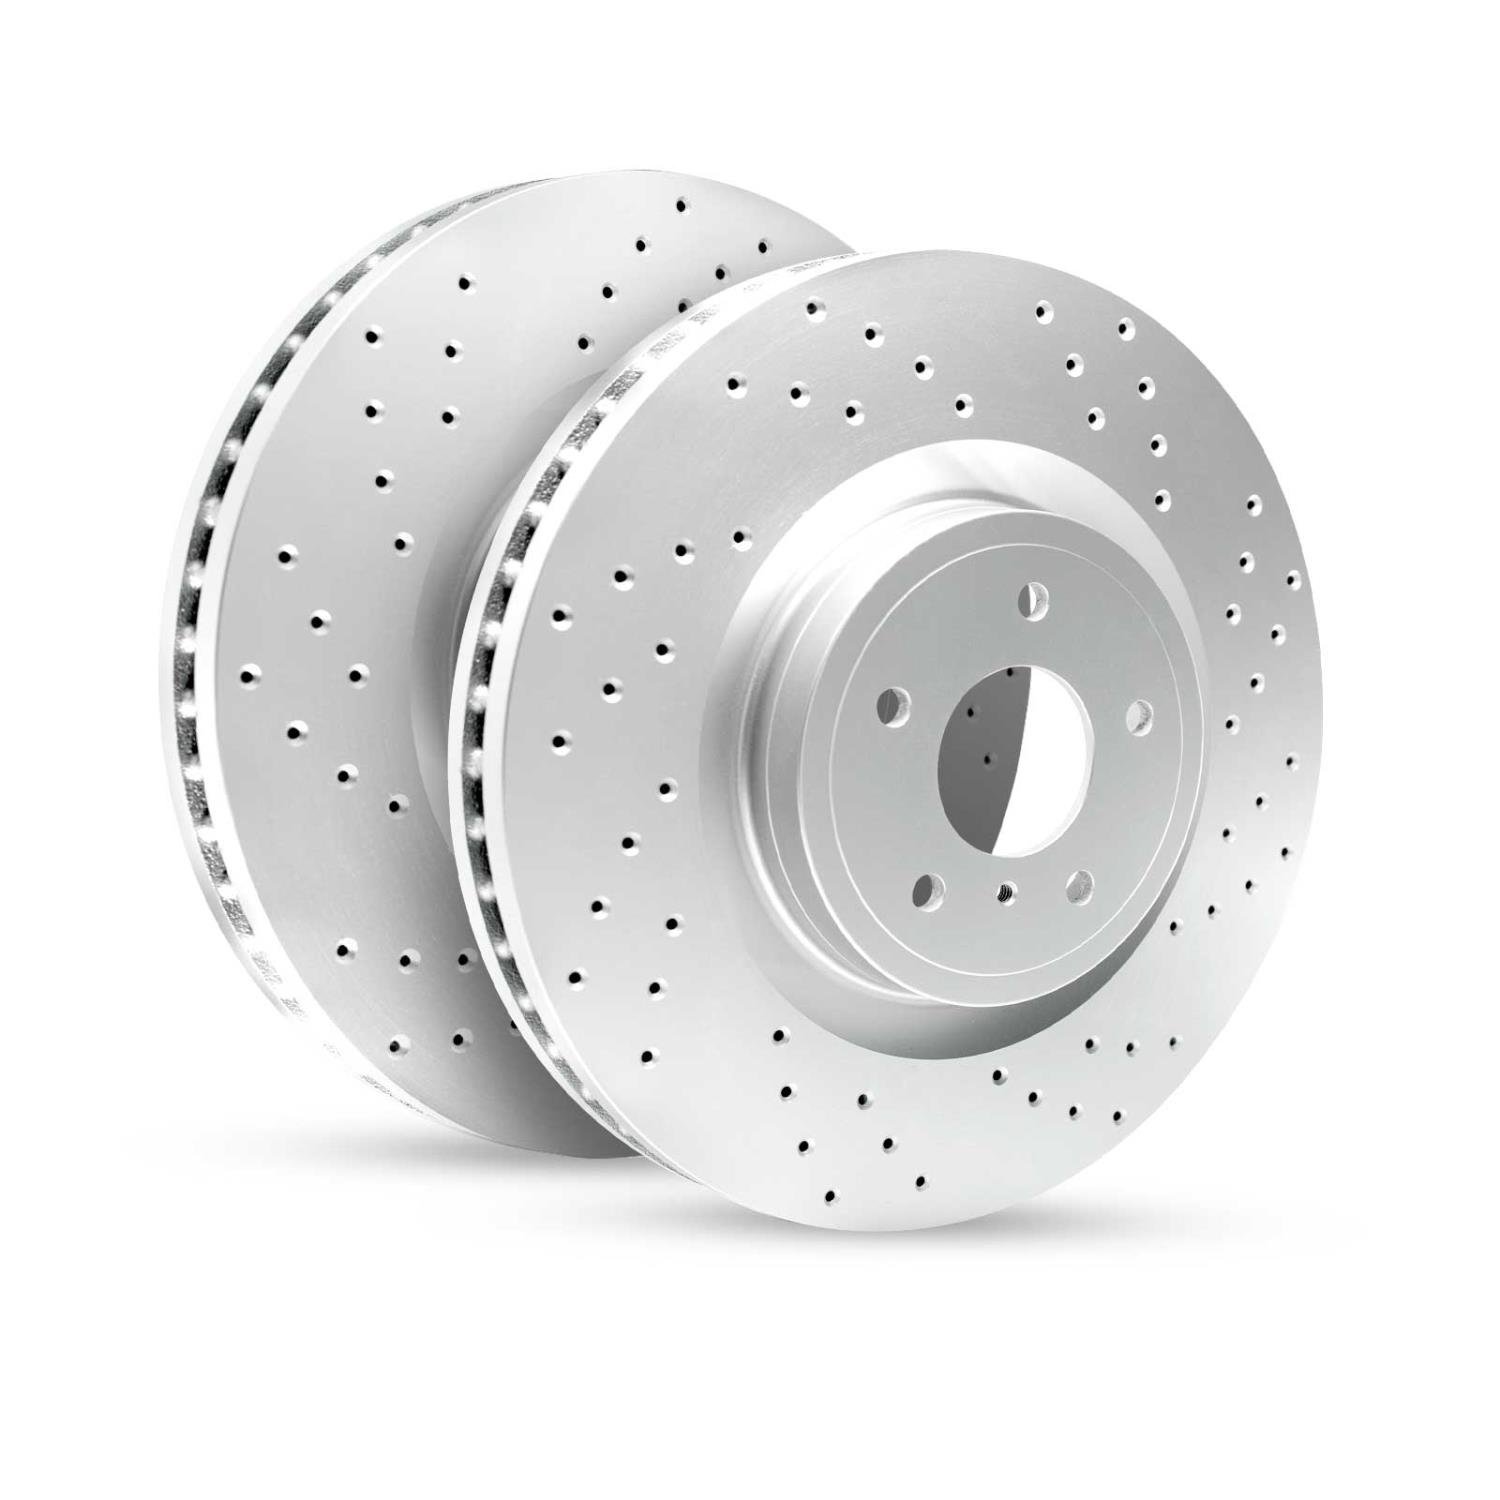 GEO-Carbon Drilled/Slotted Rotors, 2012-2021 Infiniti/Nissan,